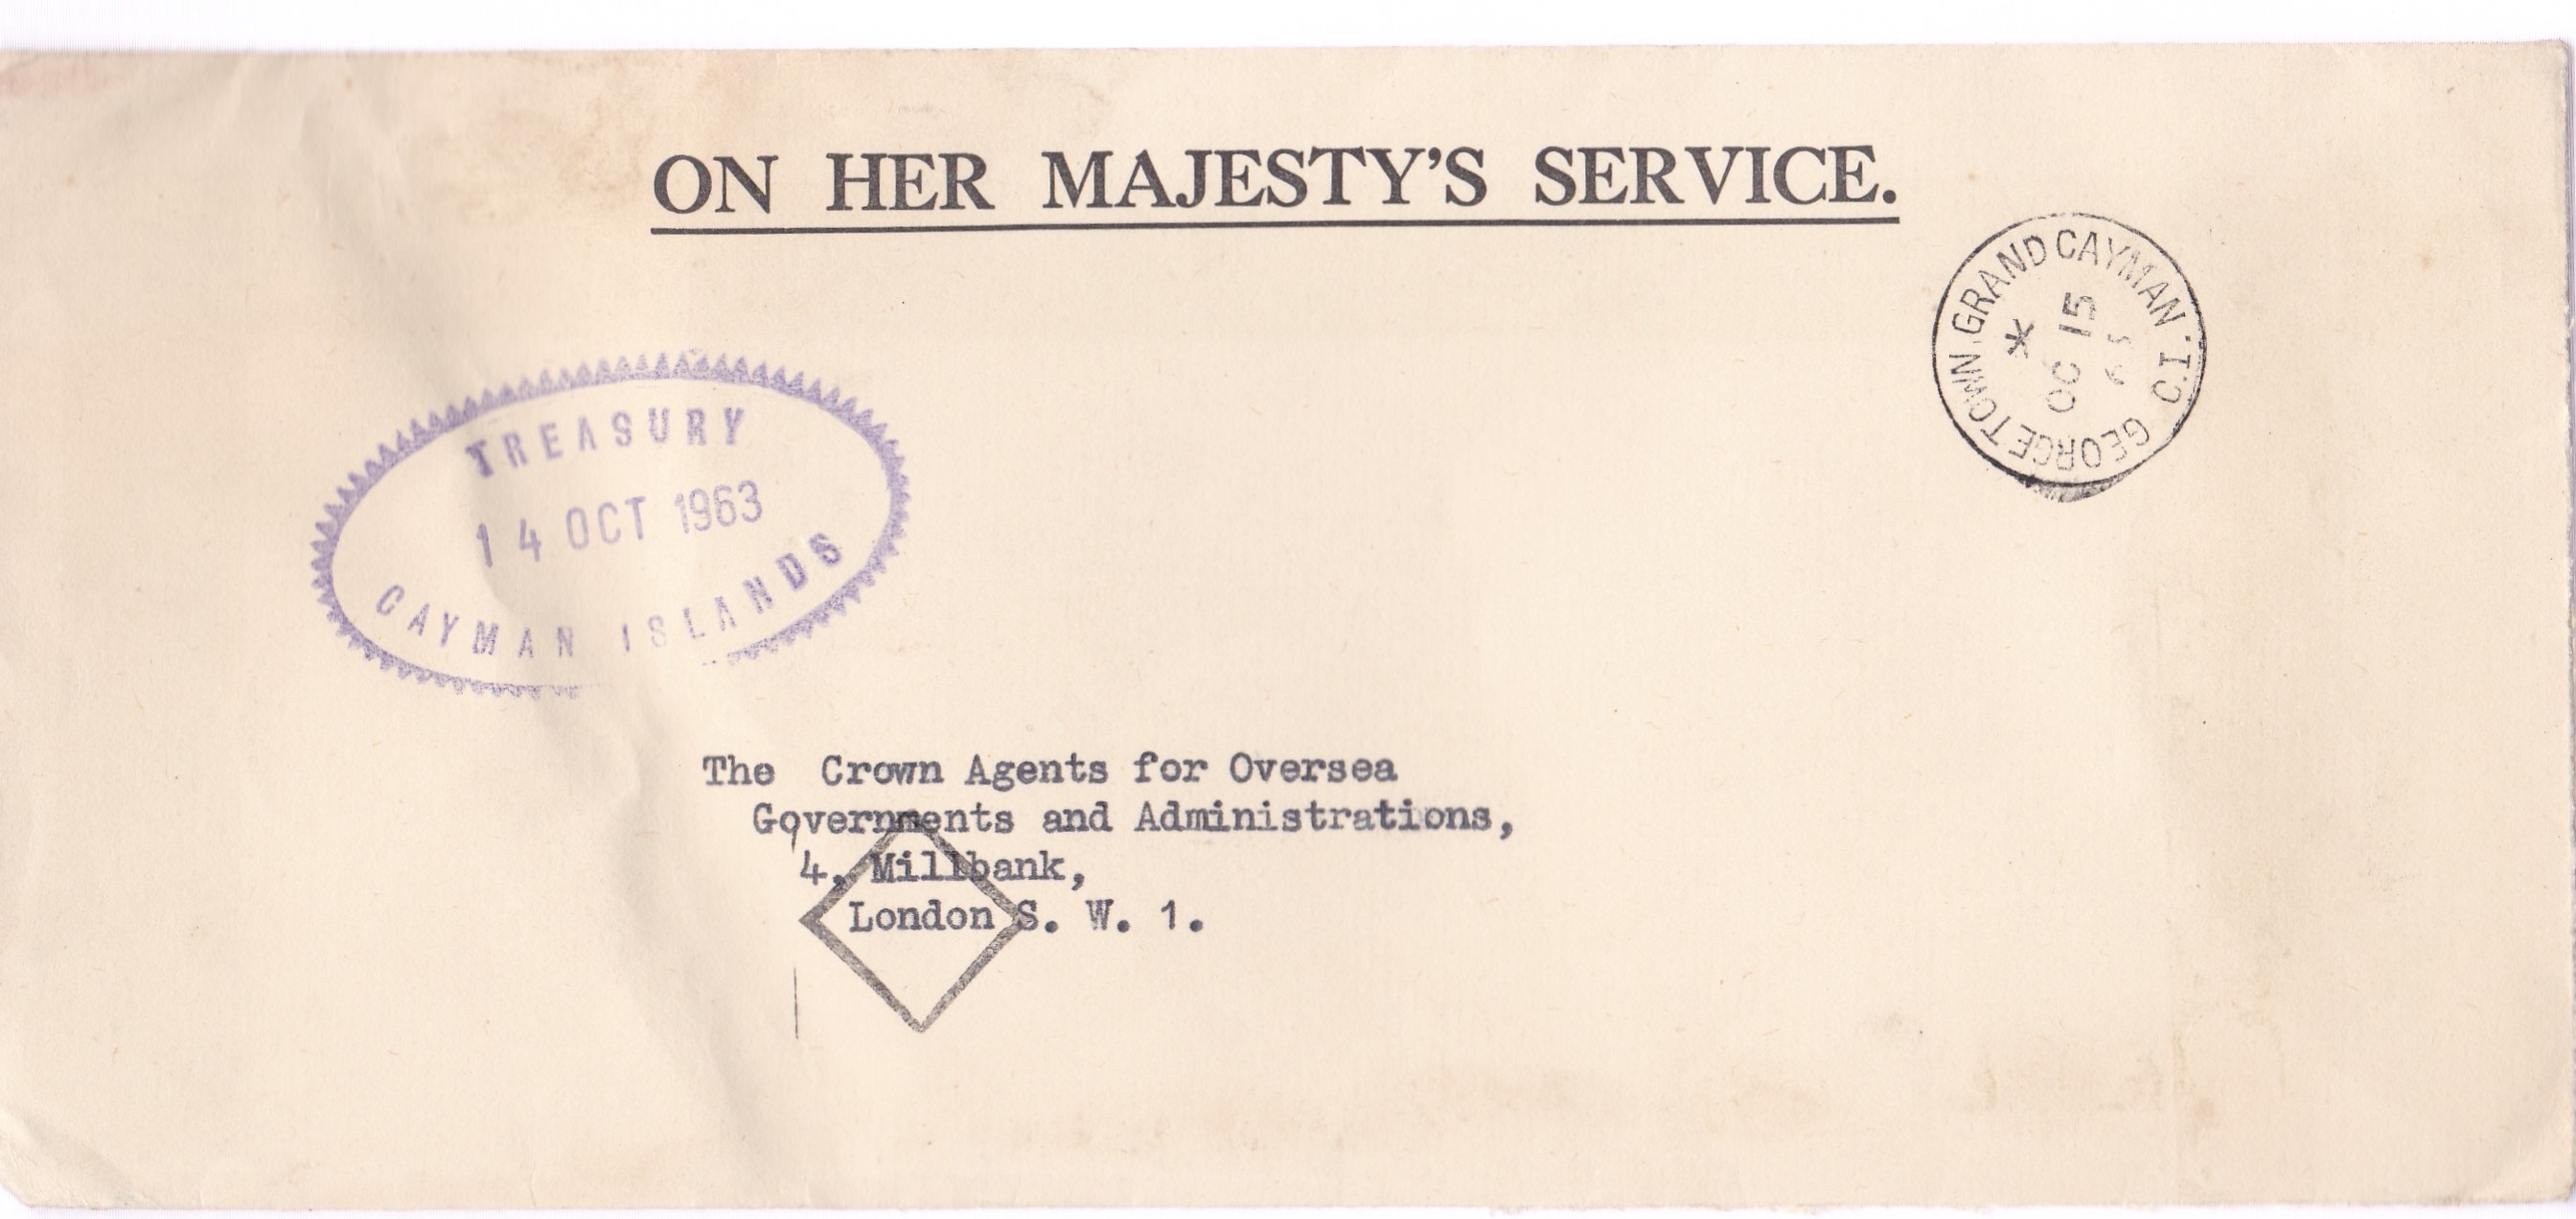 Cayman Islands 1963 - O.H.M.S envelope to Crown Agents, Millbank with Grand Cayman C.I. Georgetown